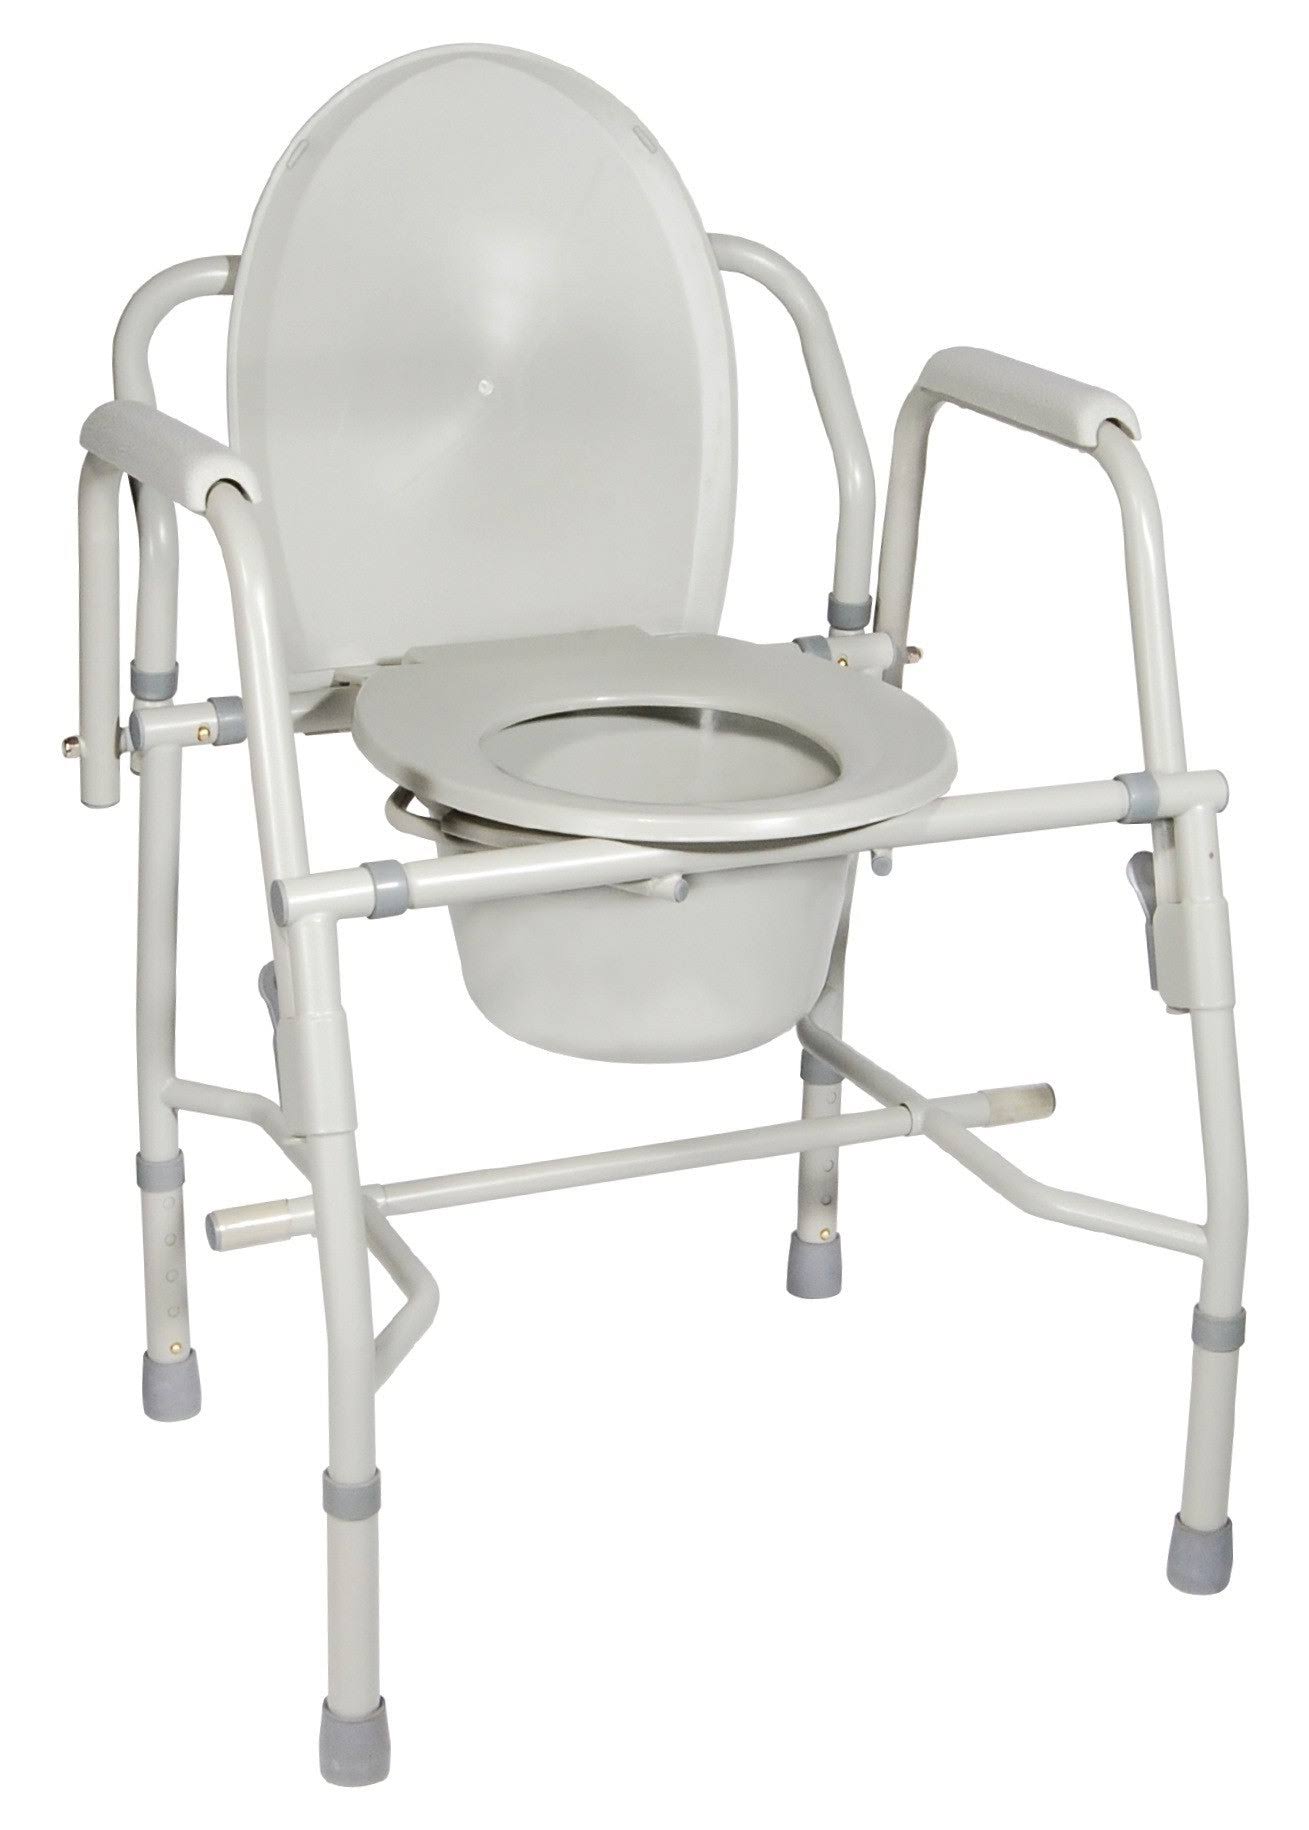 Drive Medical K. D. Deluxe Drop-Arm Commode - Steel